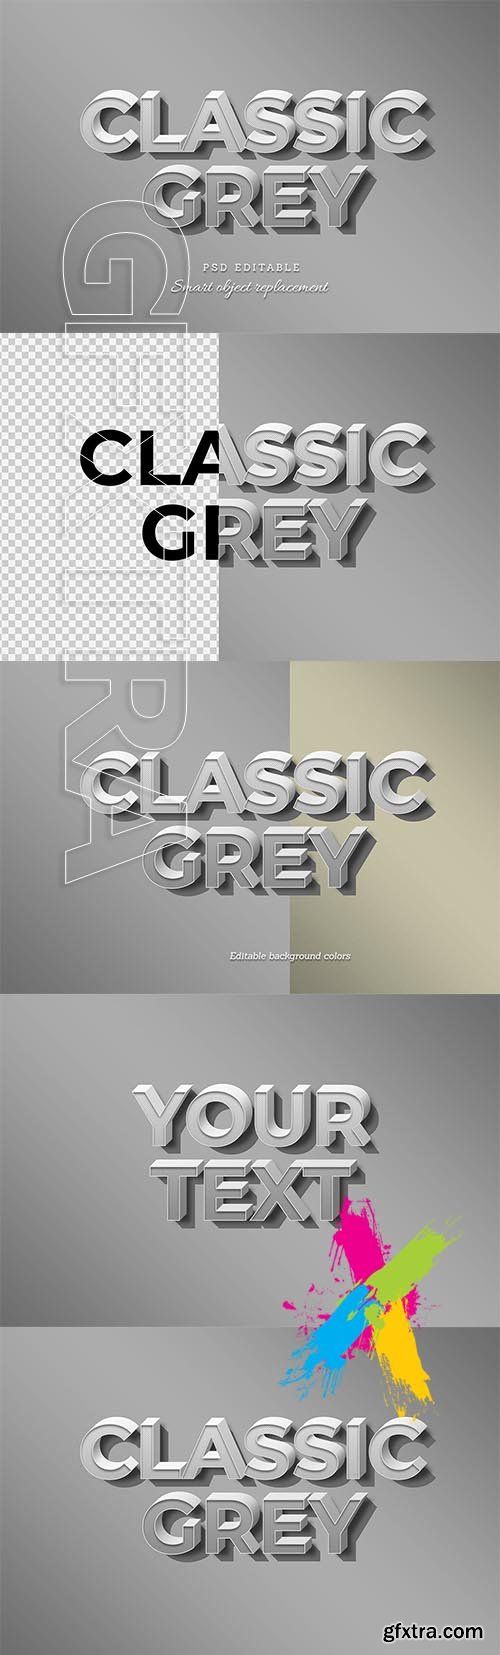 Classic Grey Text Effect